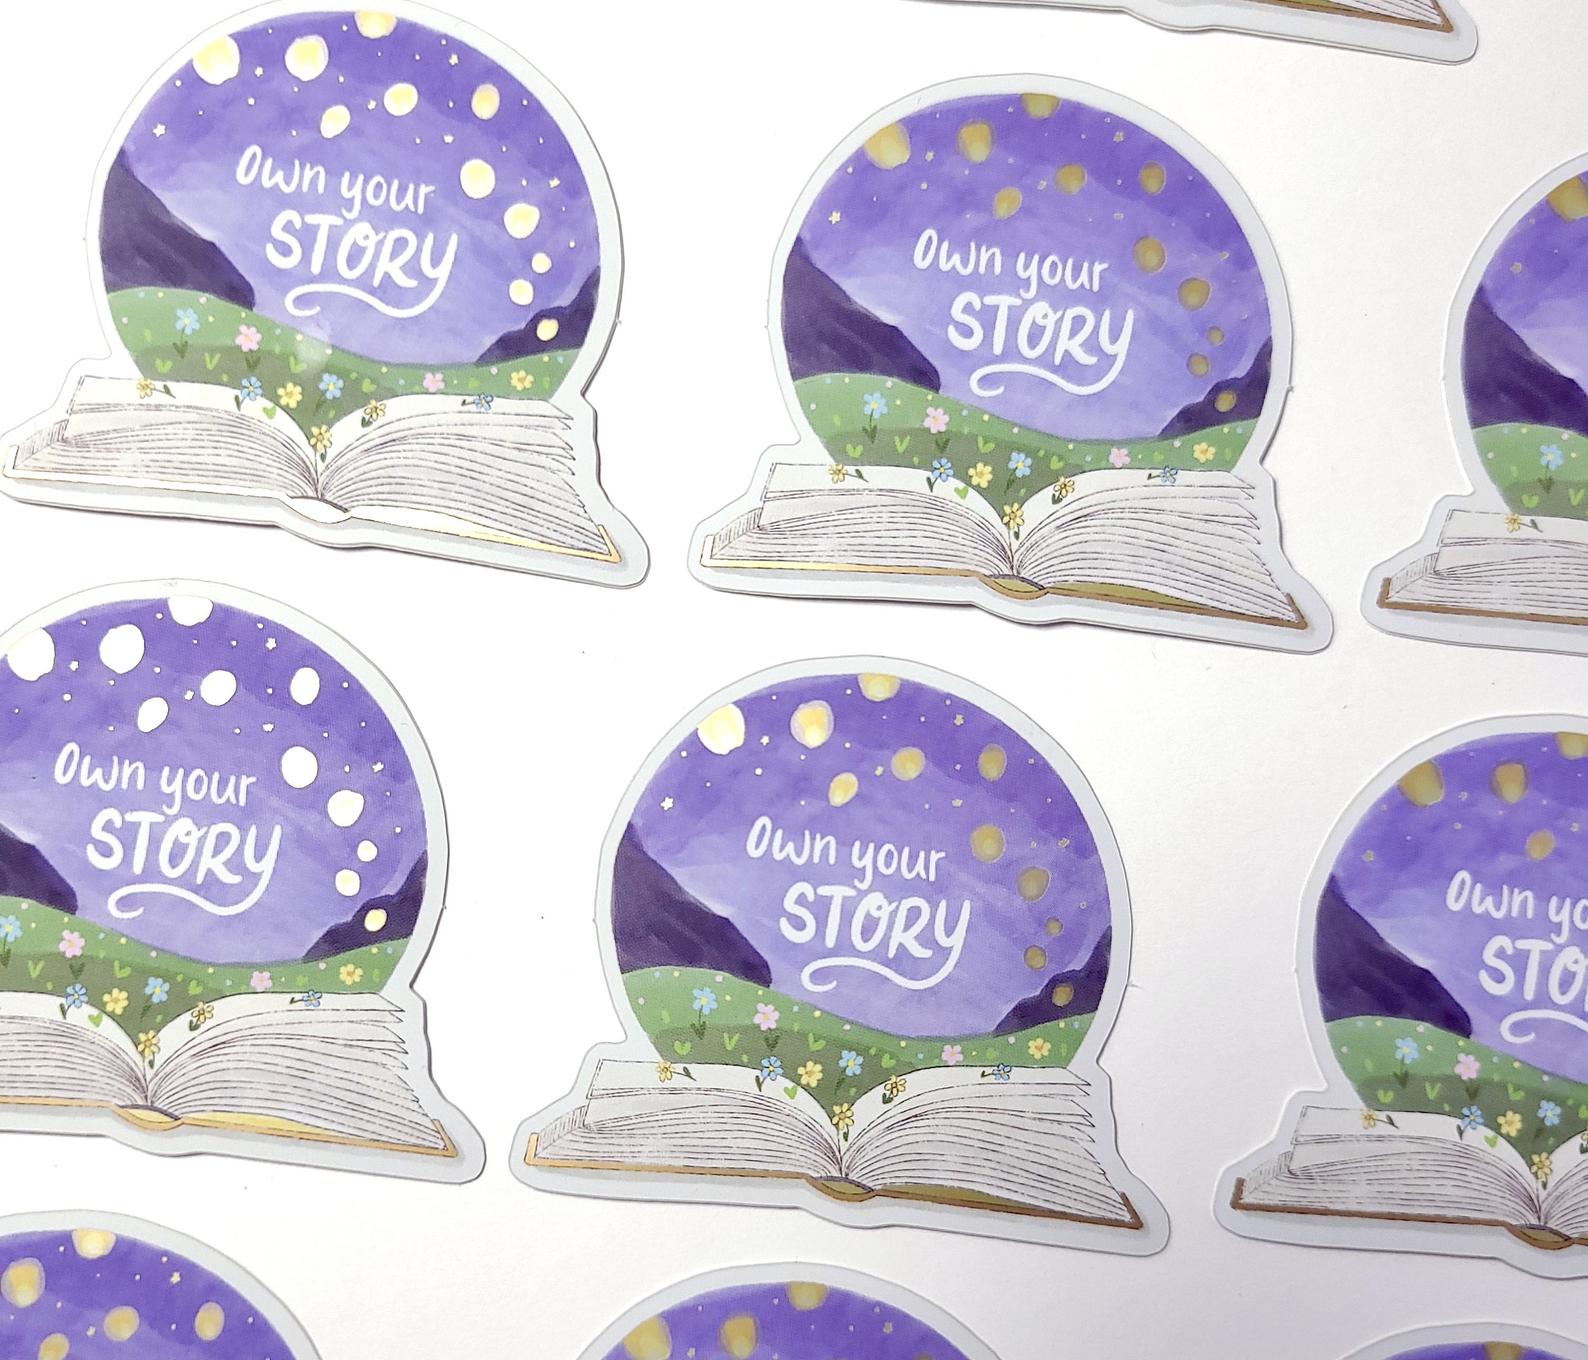 How to Make Your Own Story Stickers?